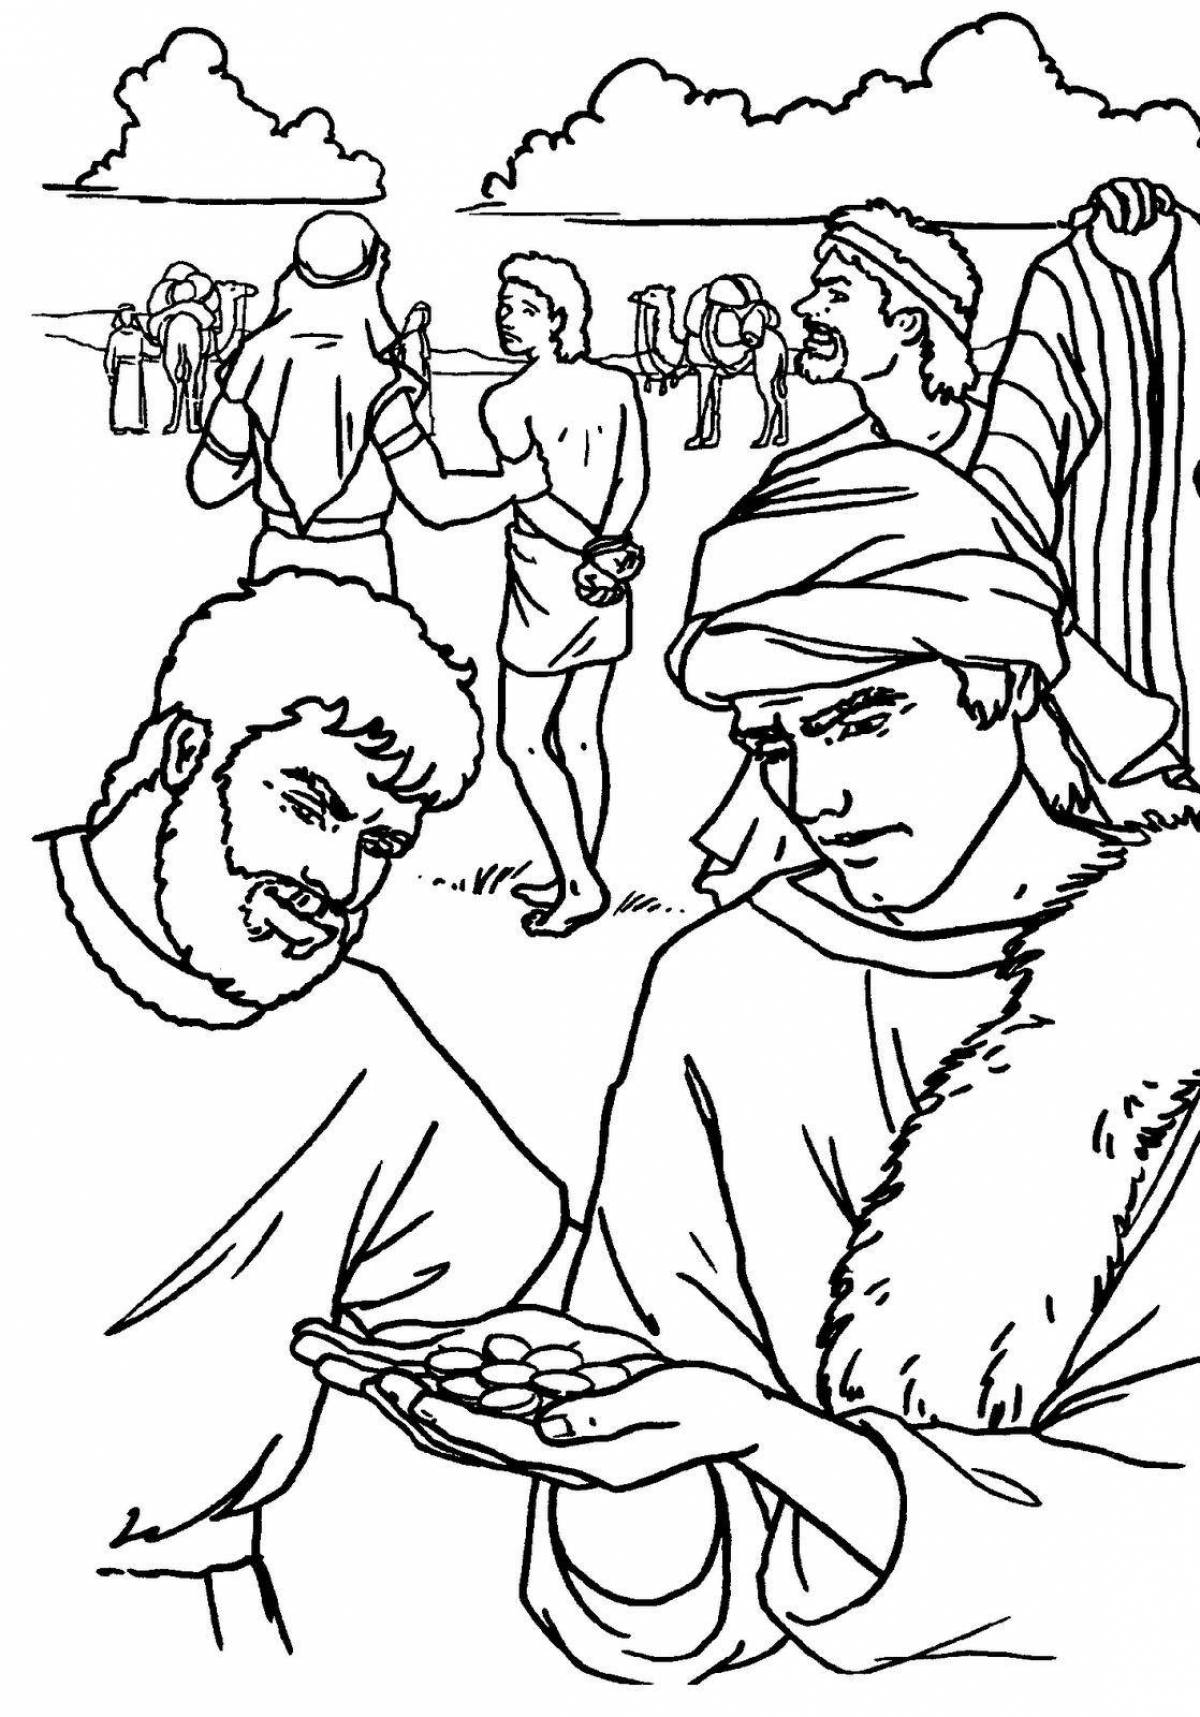 Wonderful bible coloring book for kids